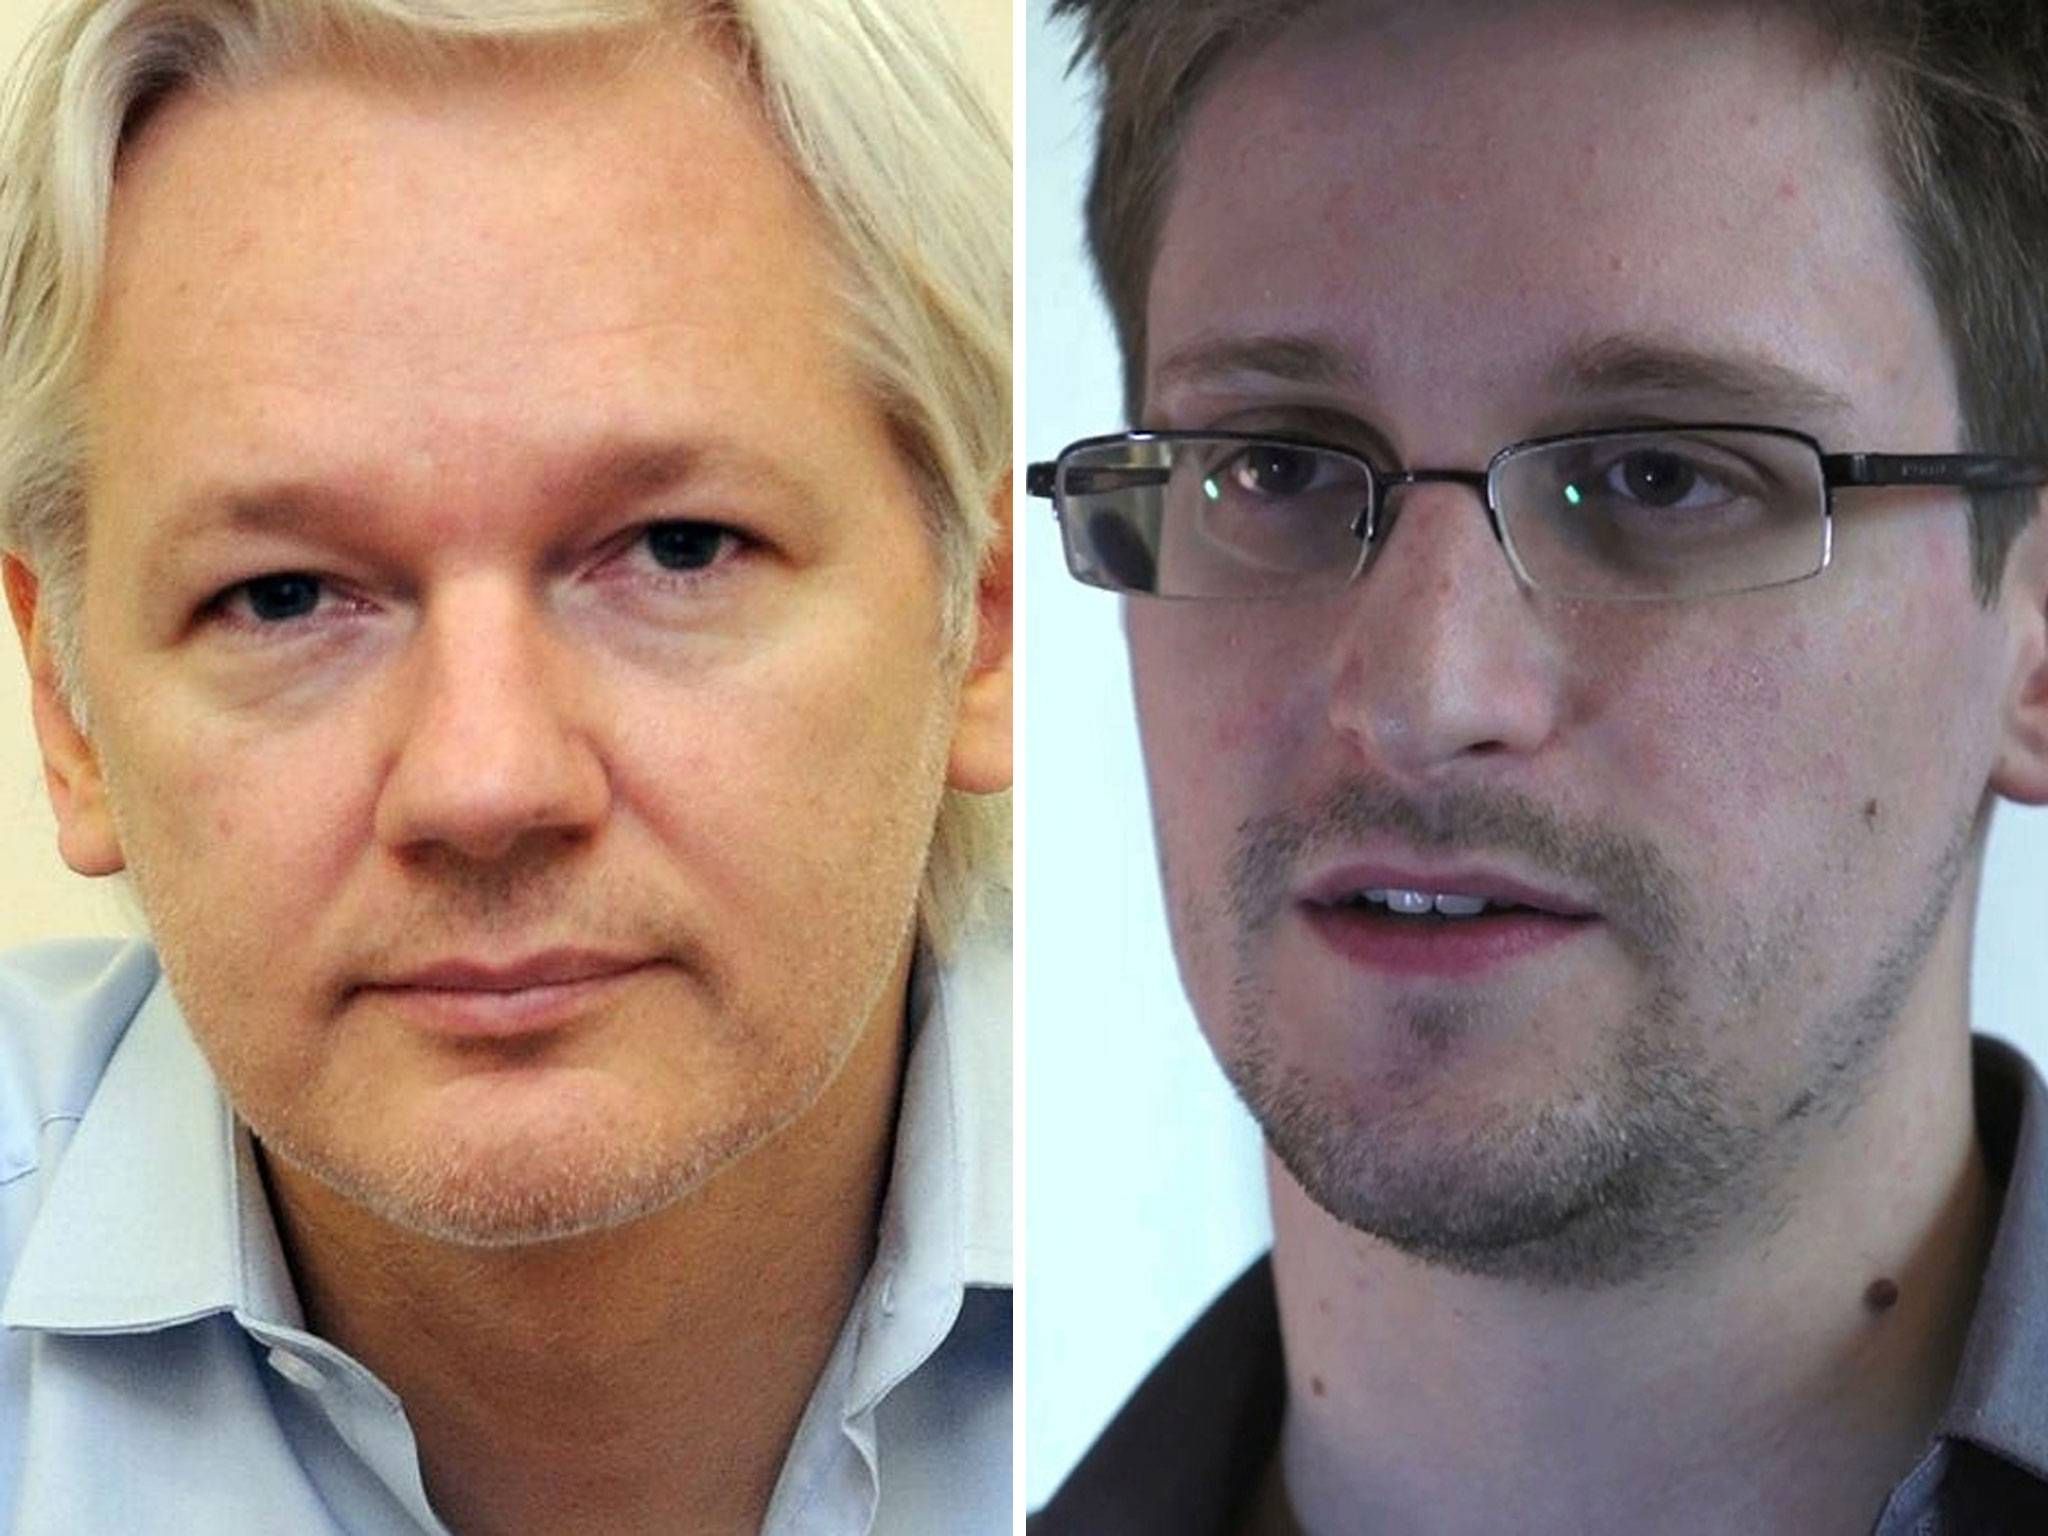 Snowden documents reveal covert surveillance and pressure 